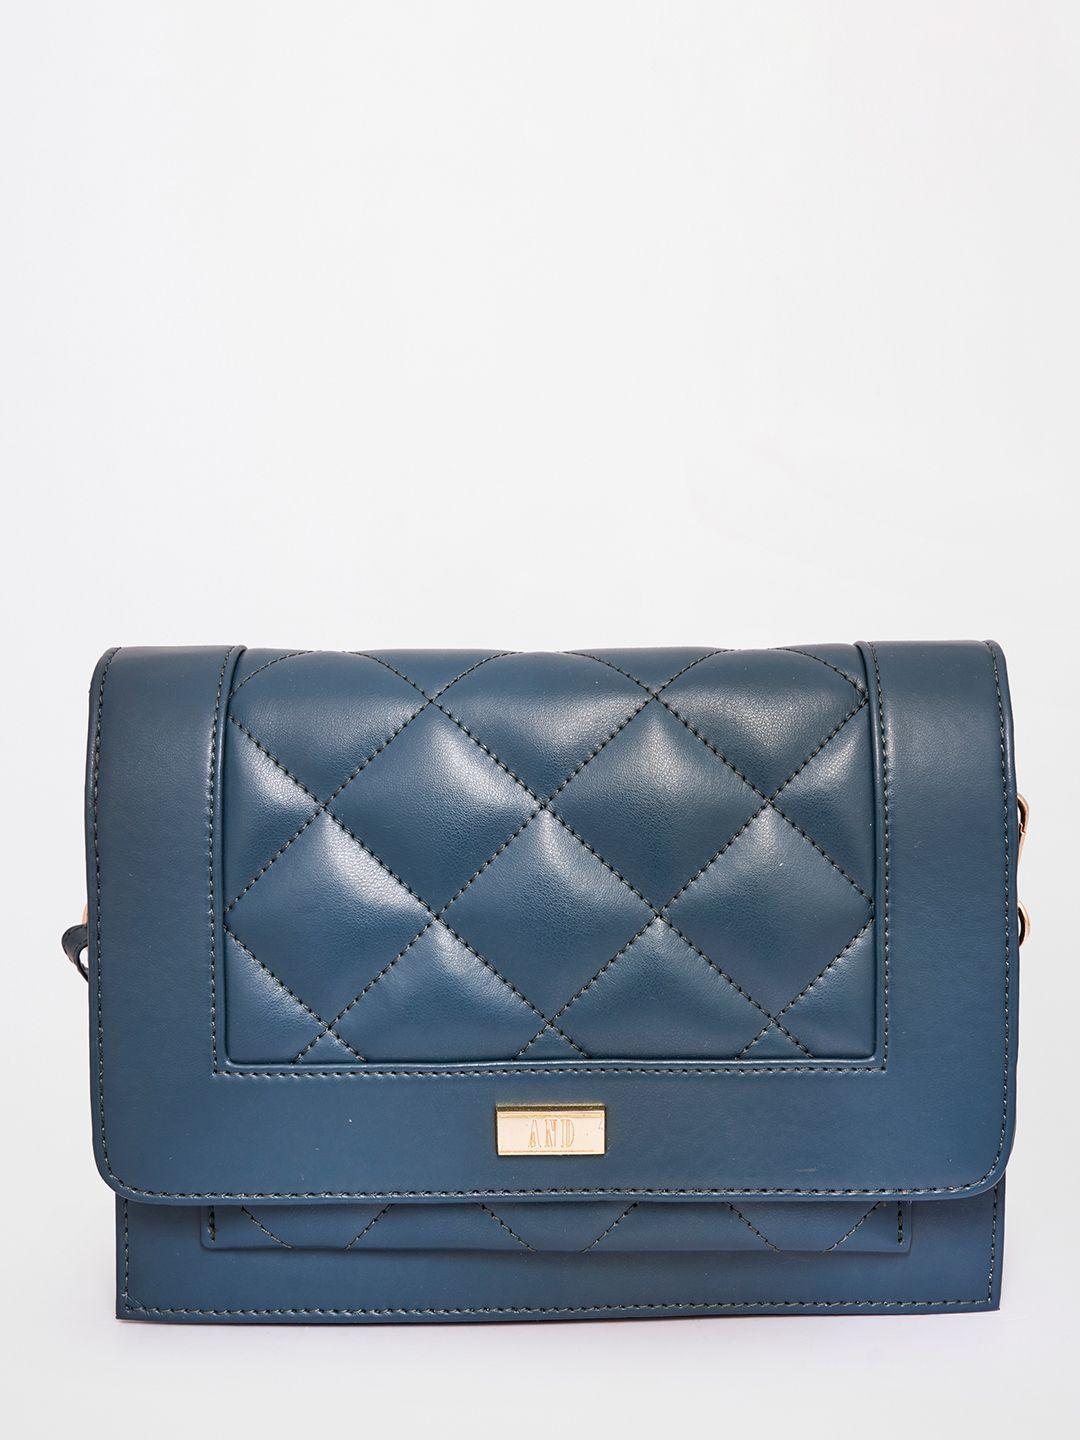 and women teal blue structured sling bag with quilted